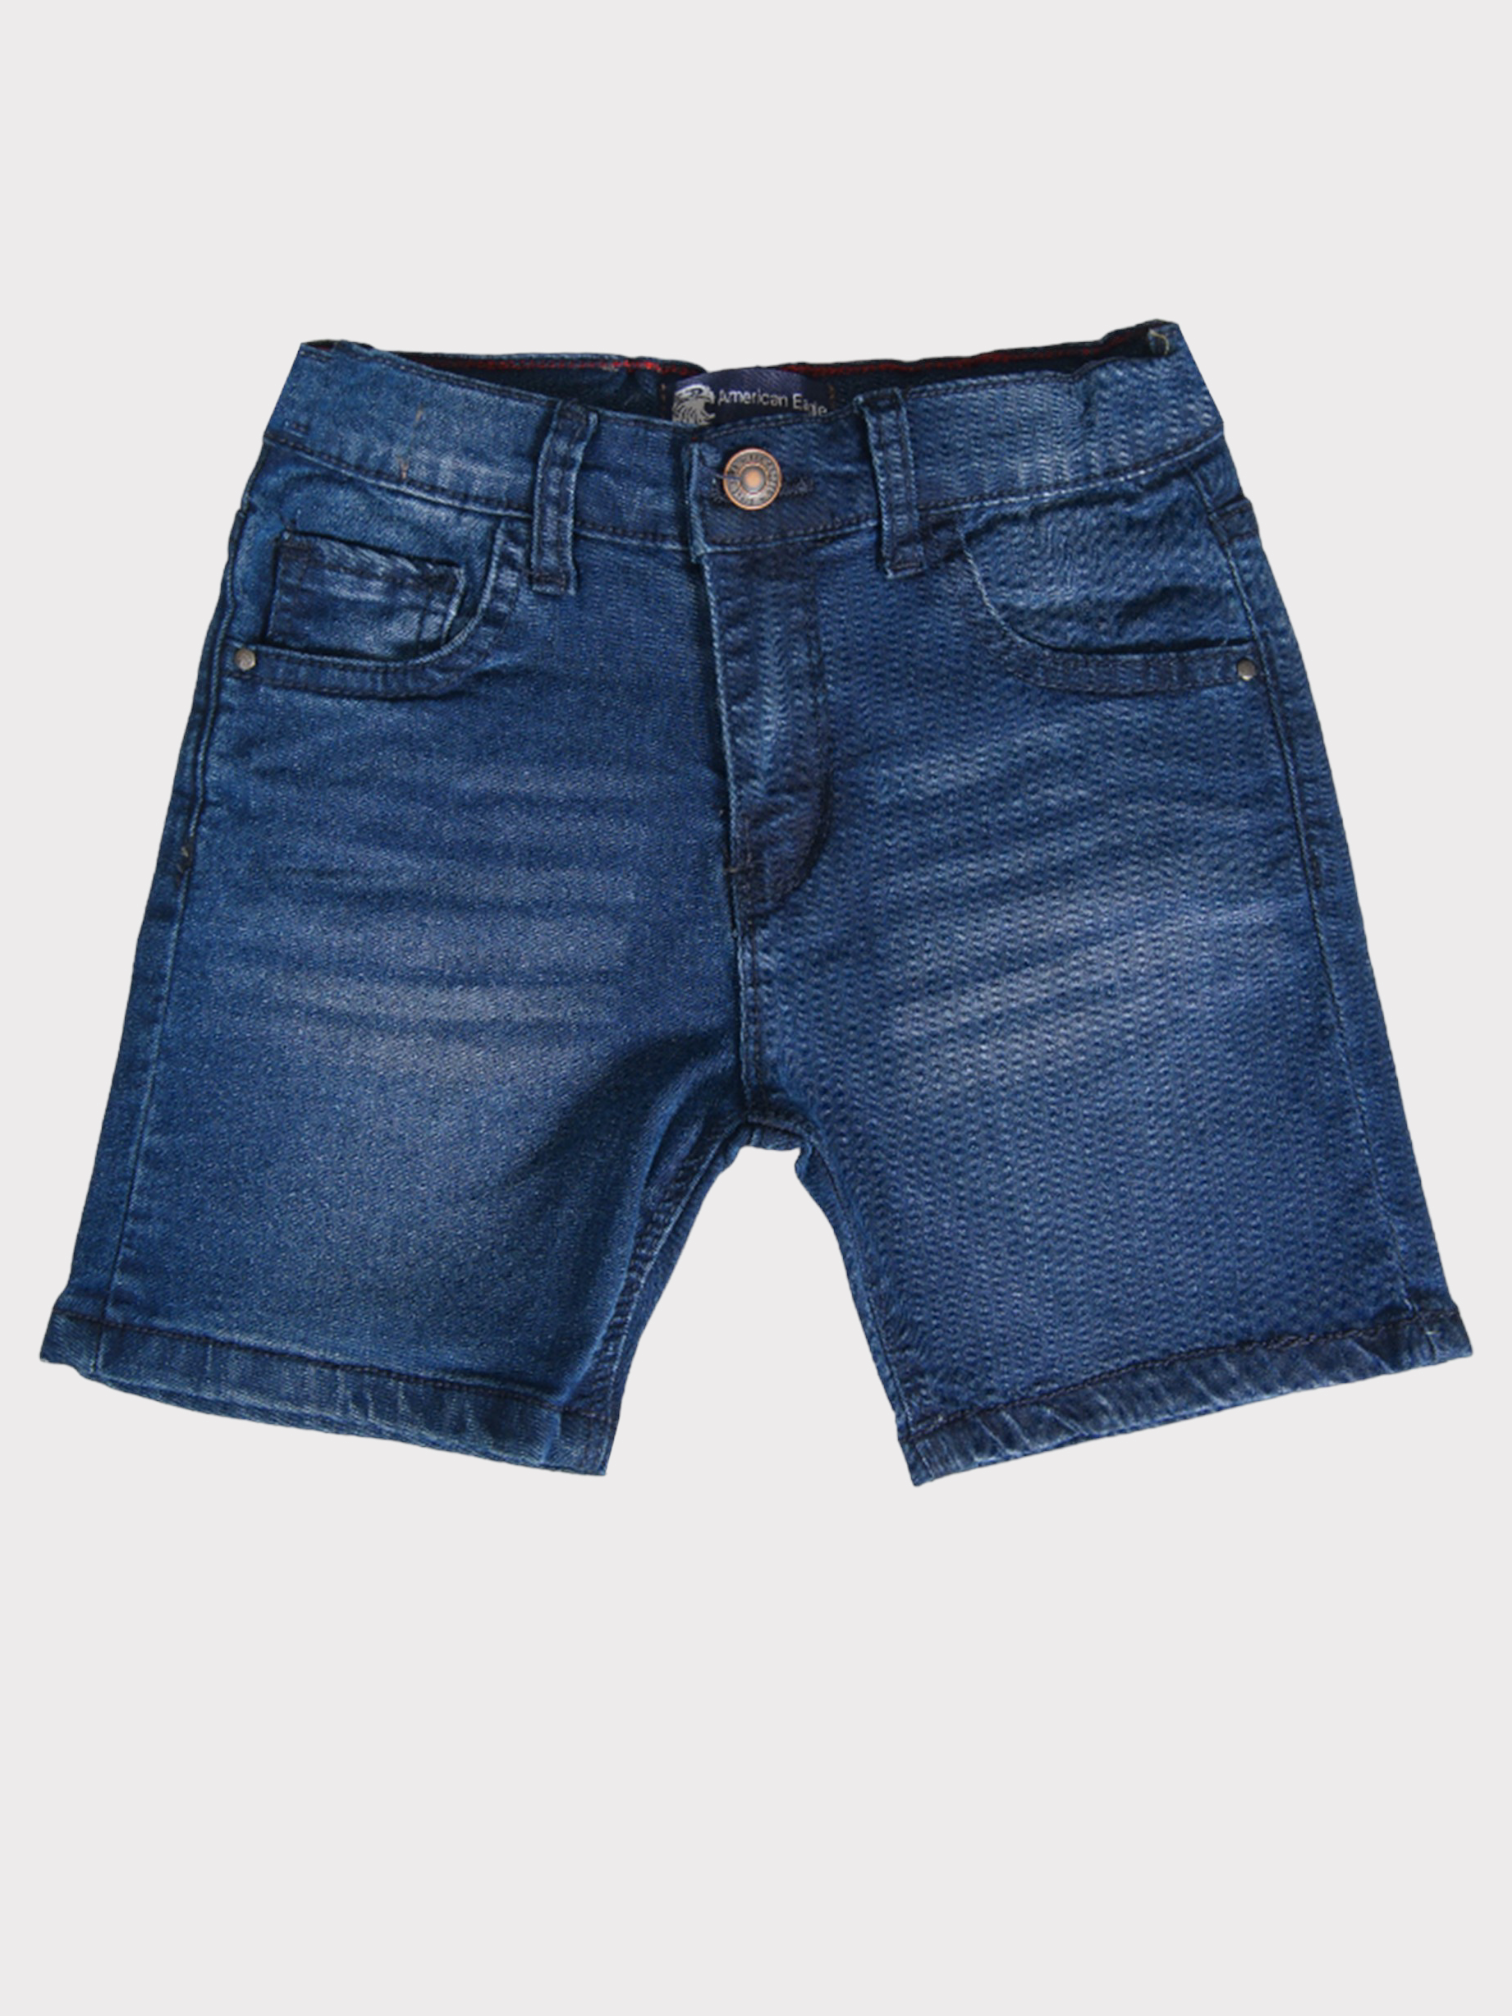 BLUE FADED JEANS SHORT